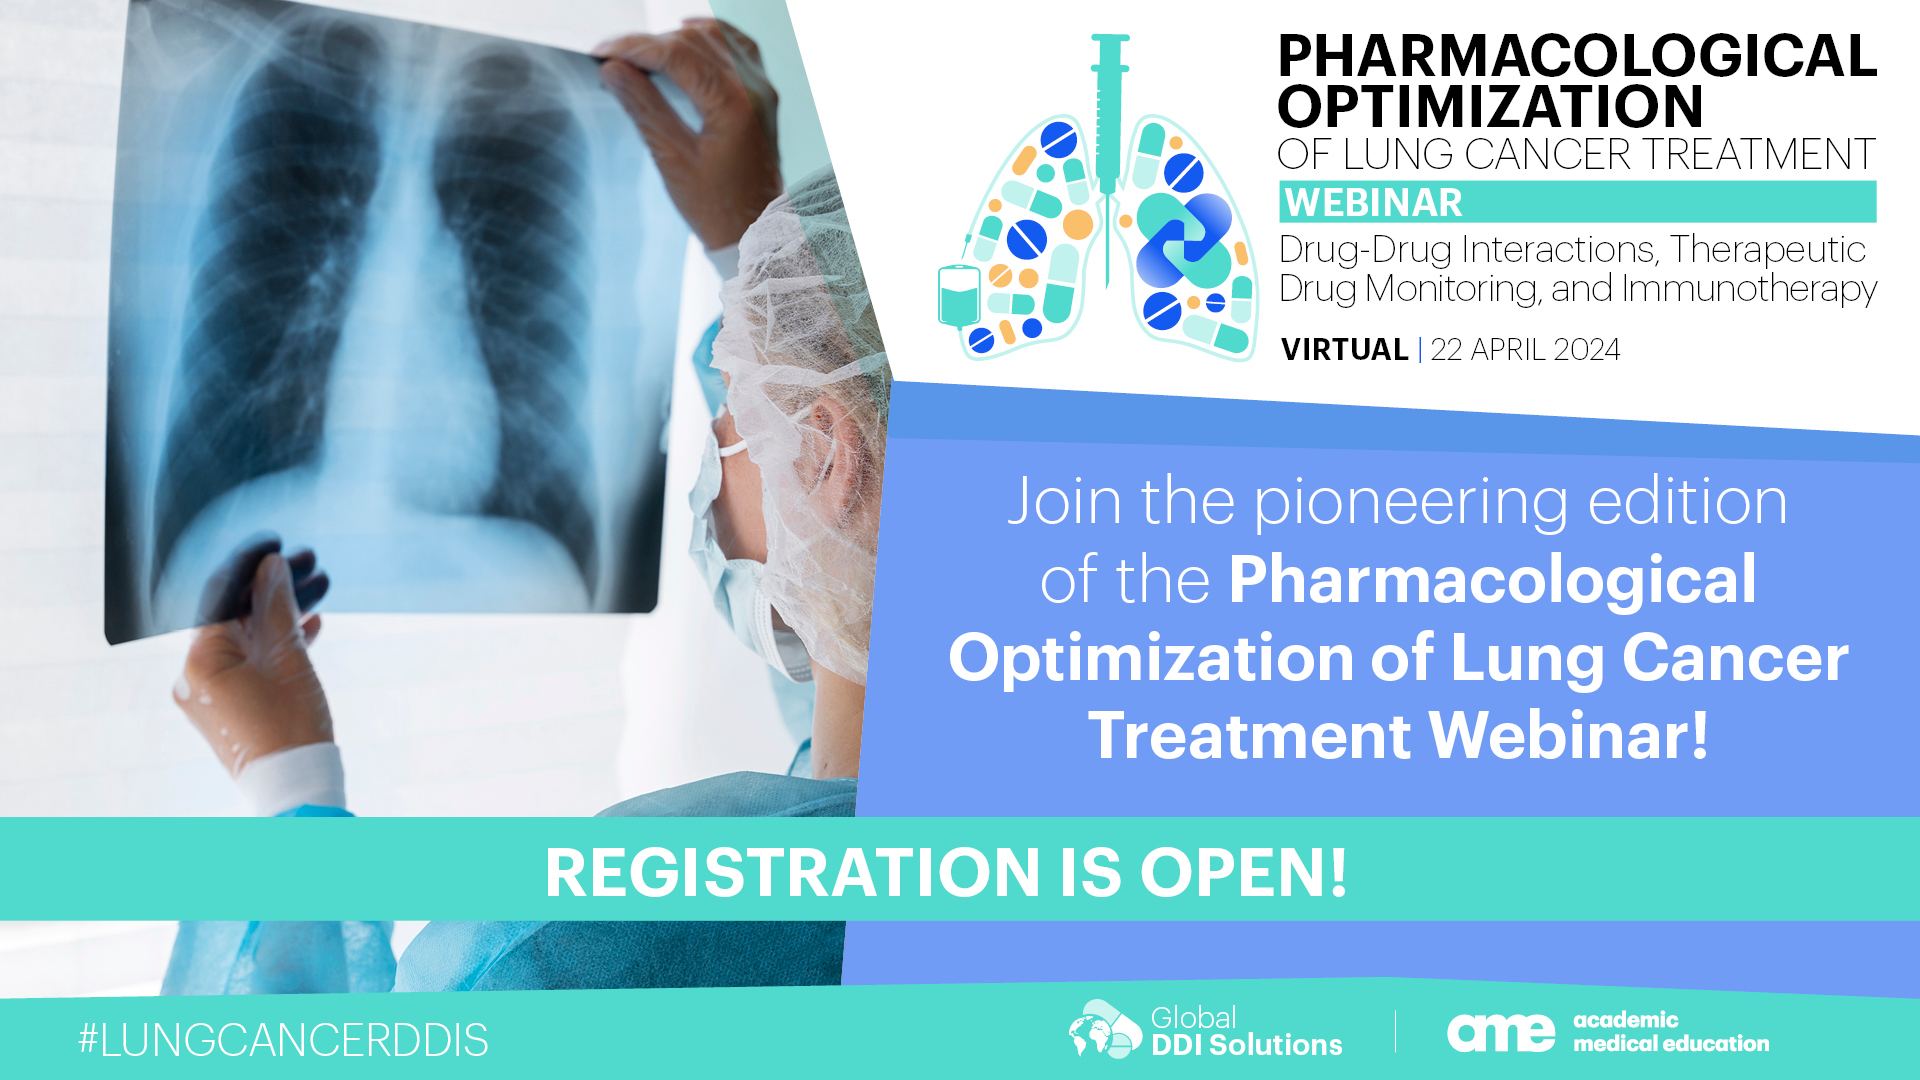 Pharmacological Optimization of Lung Cancer Treatment Webinar (22 april)<i class='restricted-content fa fa-lock'></i>